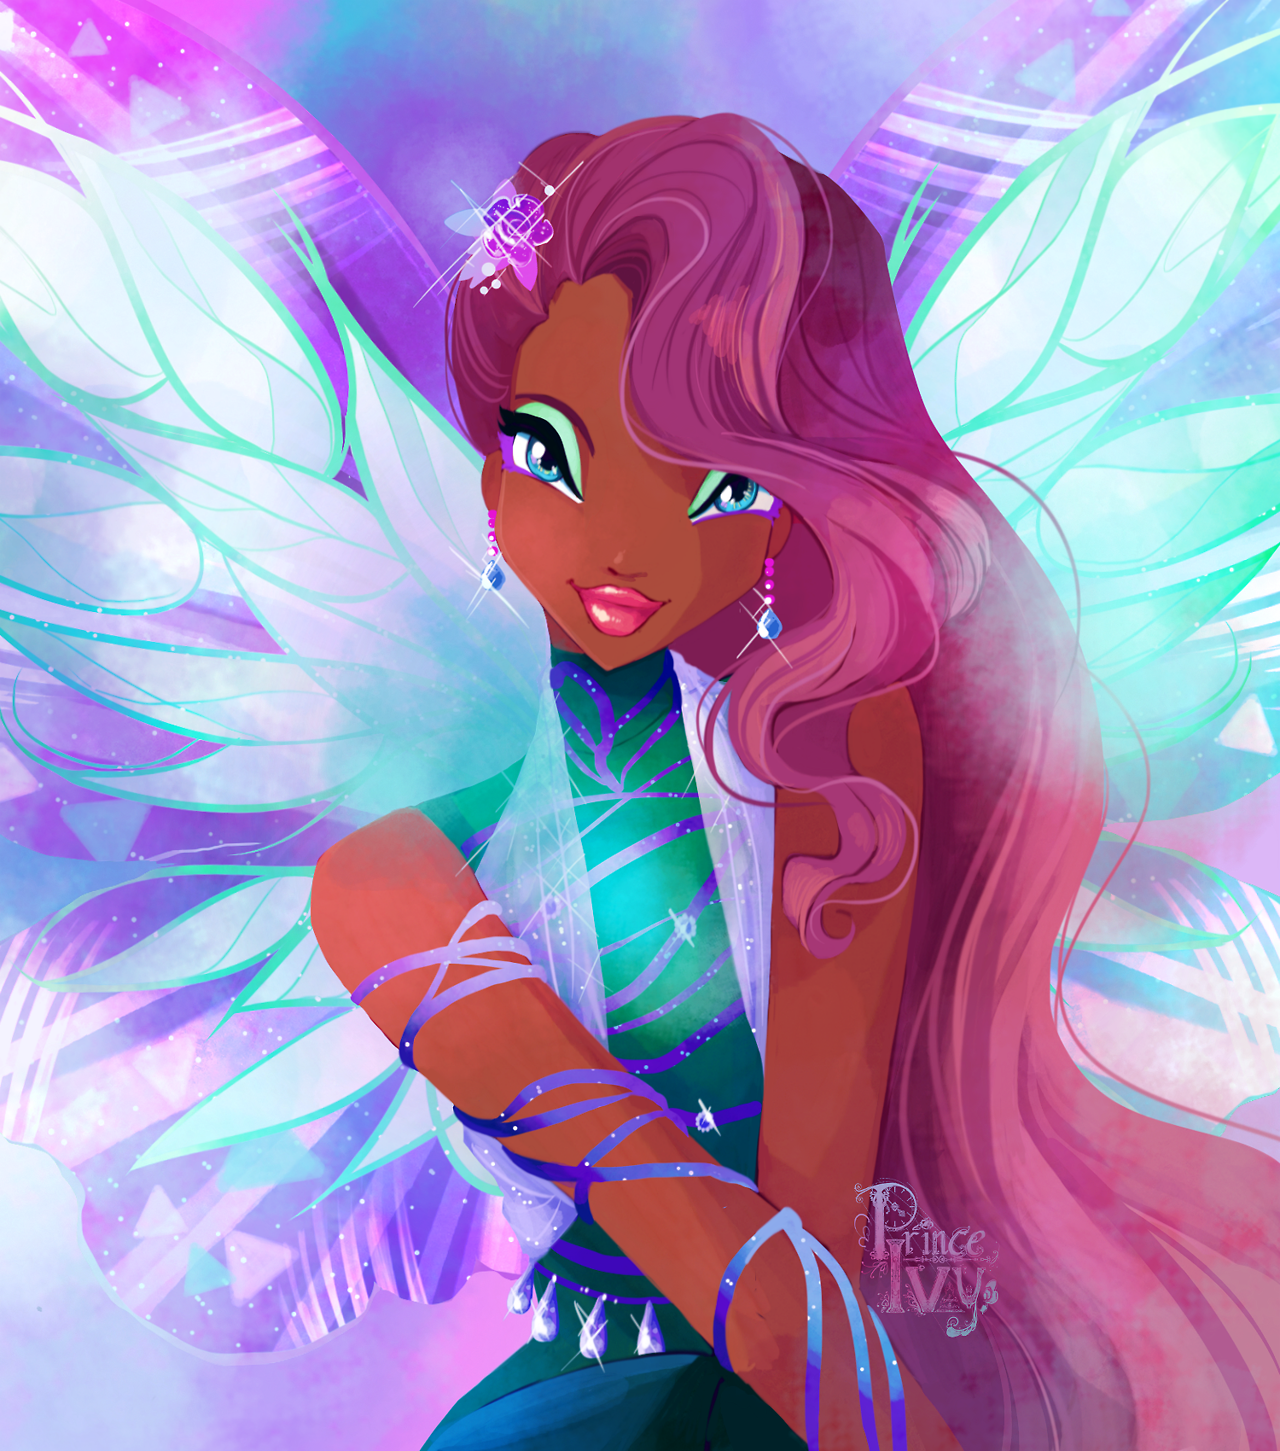 World of Winx Art by princeivy-storybook